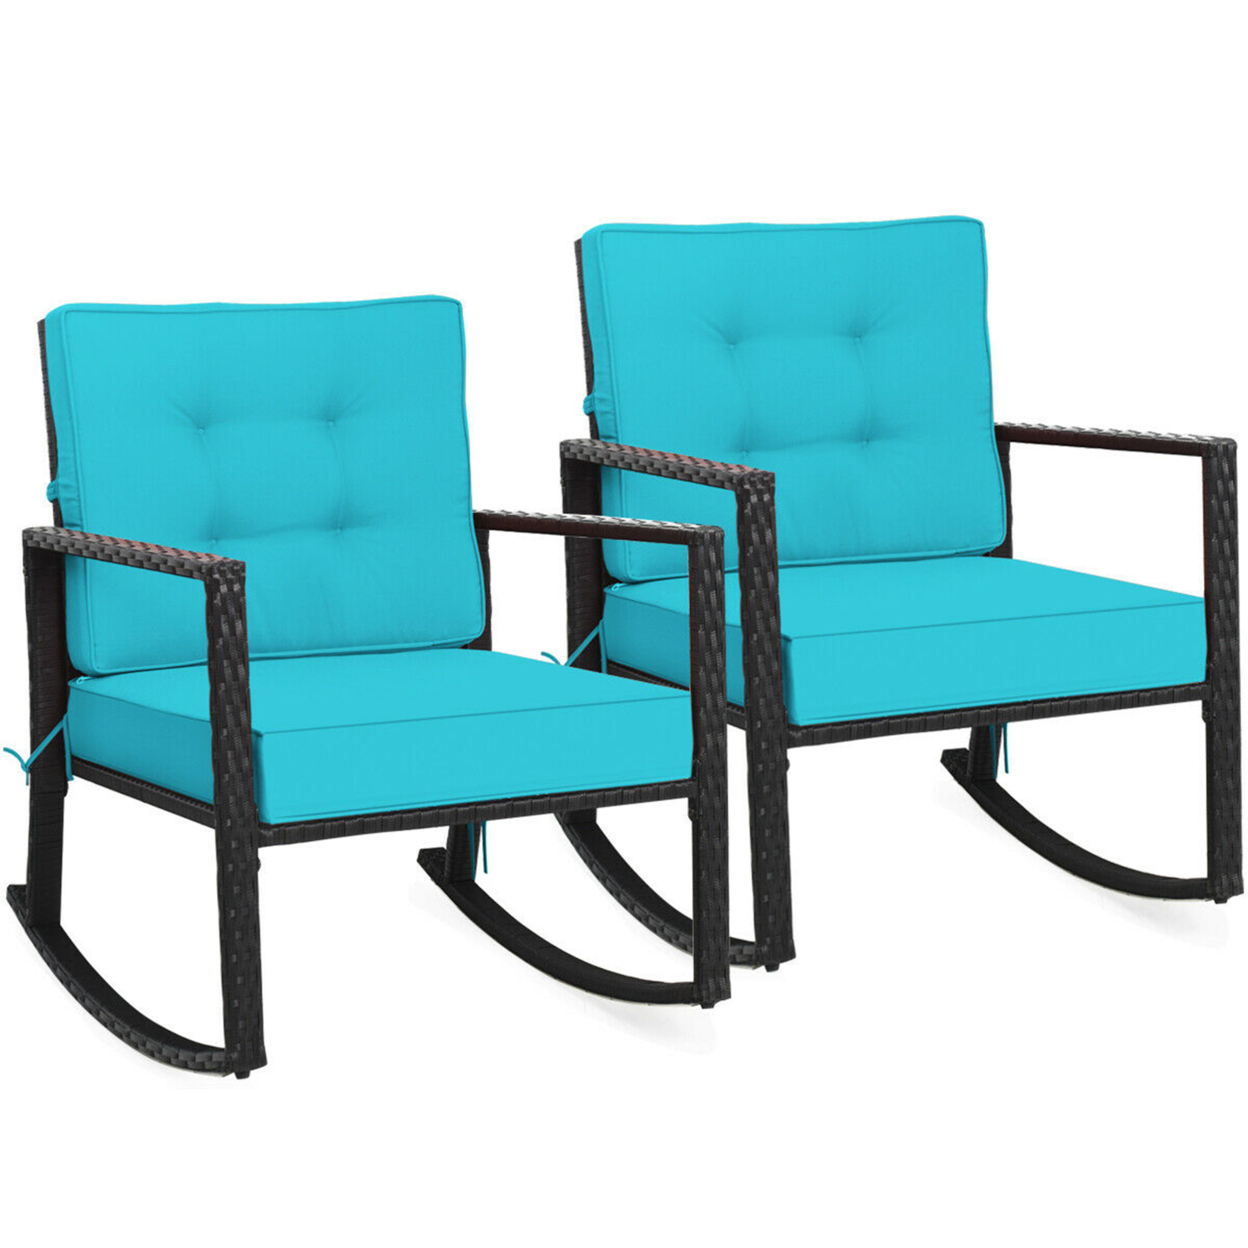 2PCS Outdoor Wicker Rocking Chair Patio Rattan Single Chair Glider W/ Turquoise Cushion